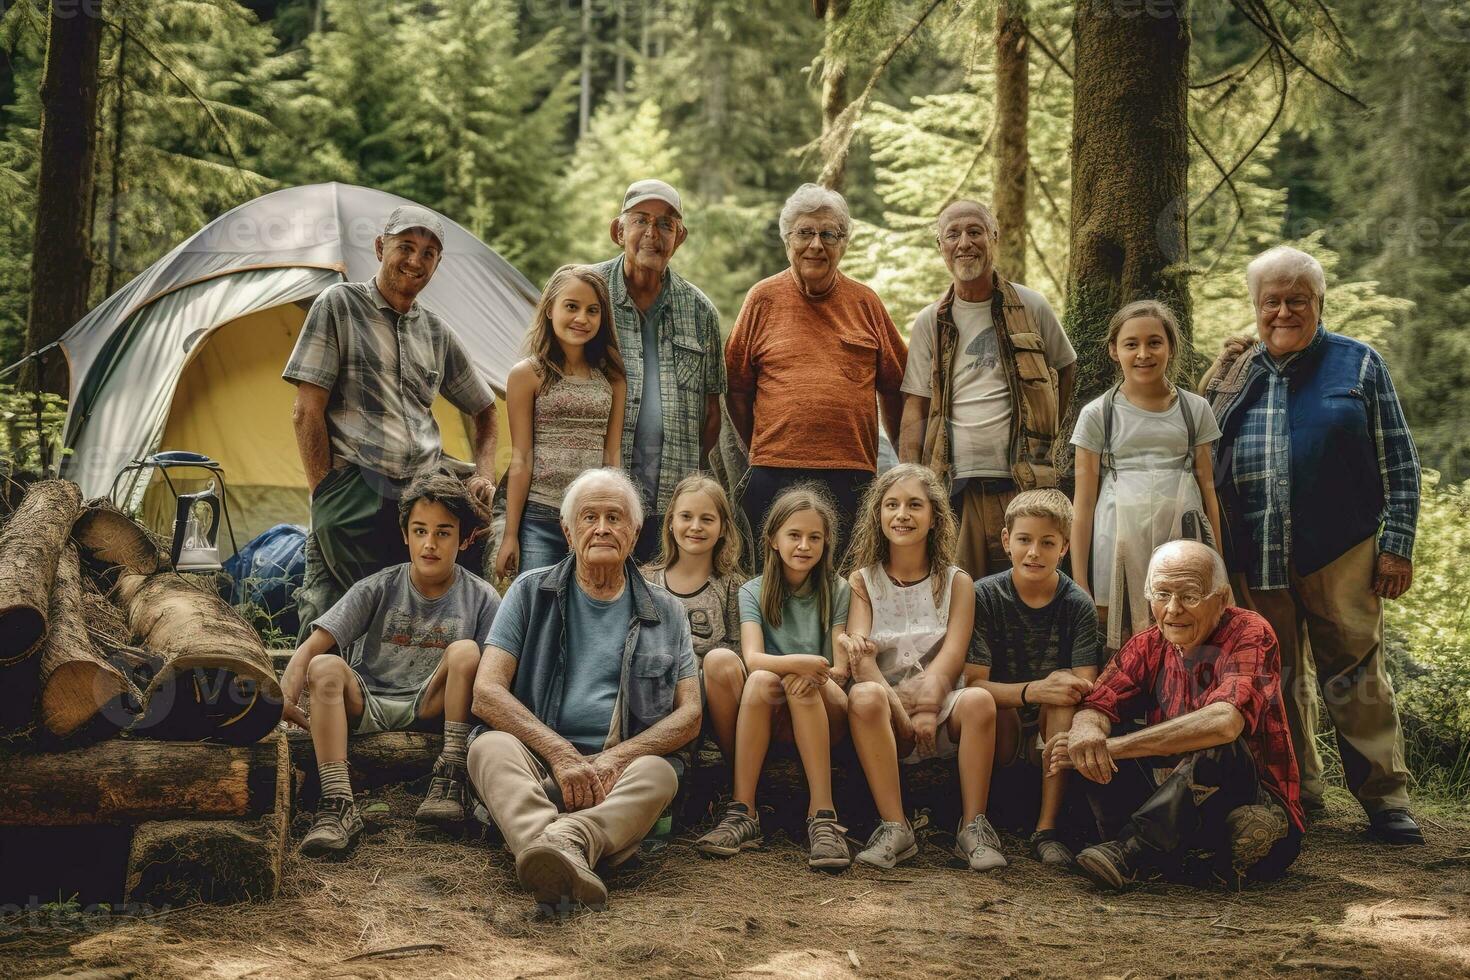 A heartwarming, group photo of a multi-generational family camping trip, capturing grandparents, parents, and children sharing the joys of summer camping traditions. Generative AI